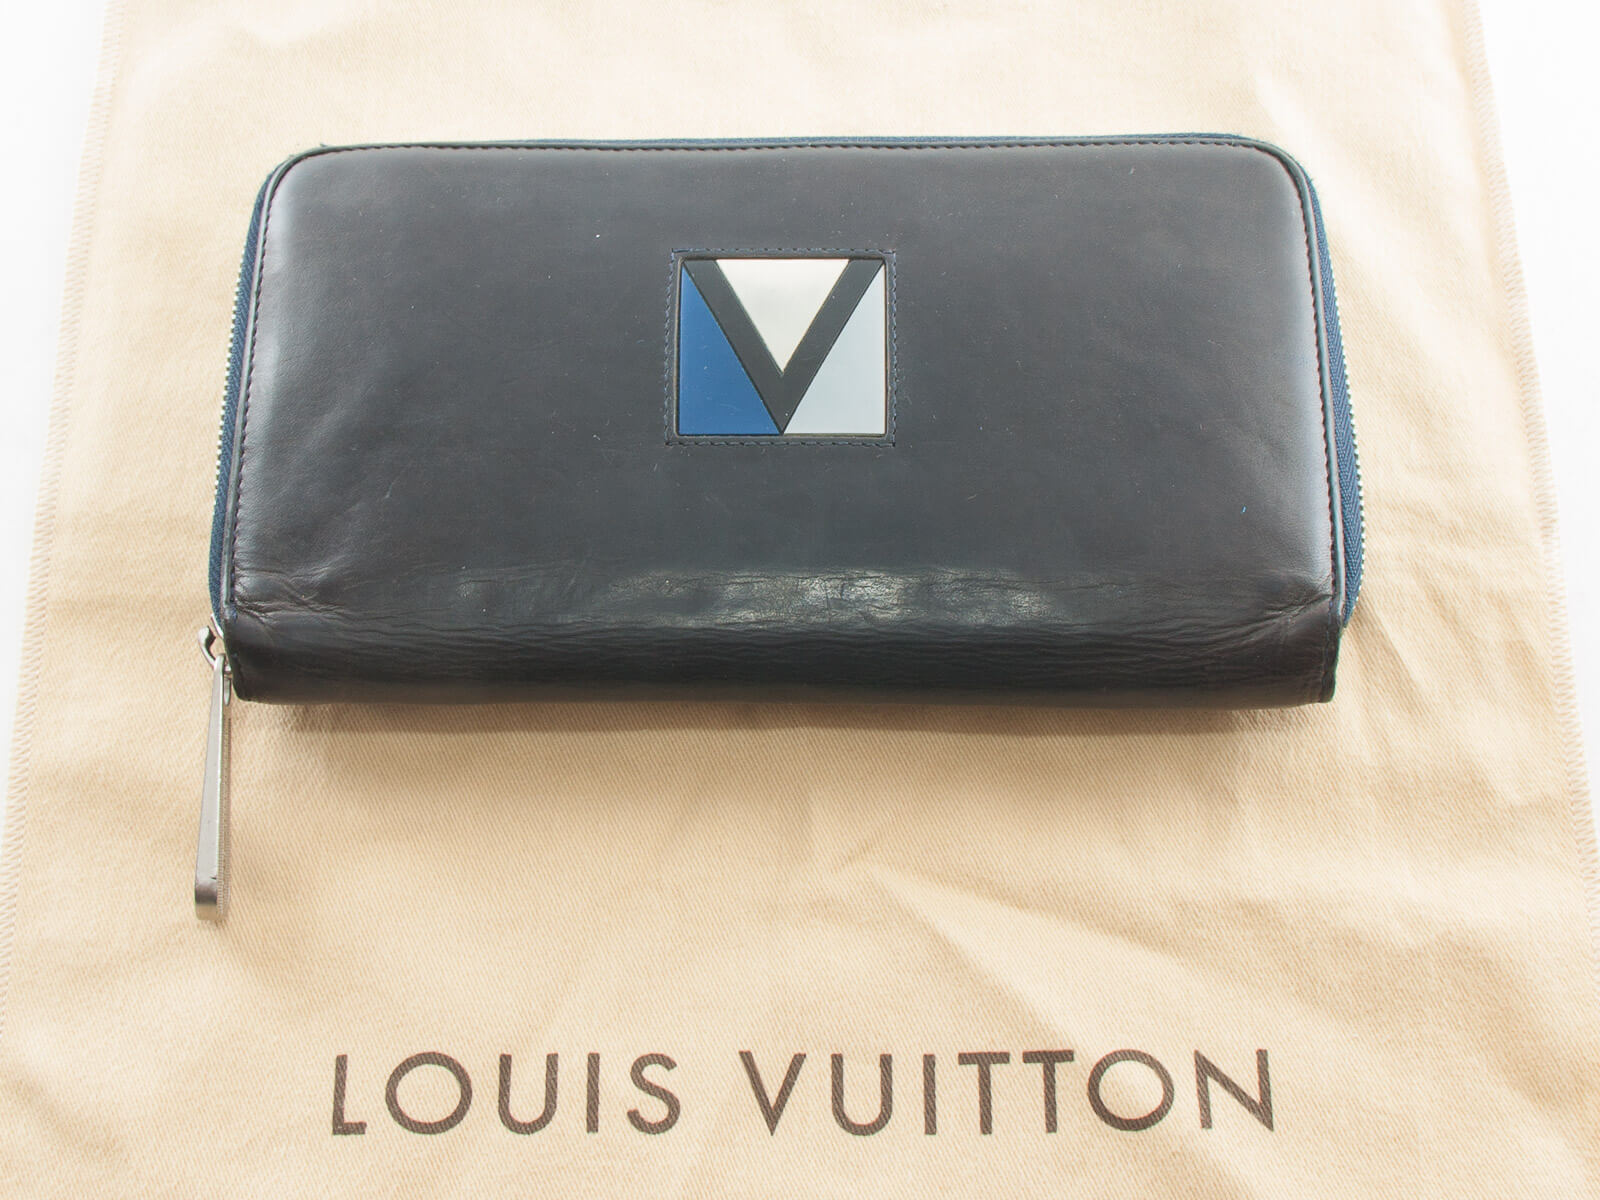 LOUIS VUITTON ZIPPY CLASSIC WALLET Authentic Louis Vuitton canvas material  upcycled and repurposed into wallet .Turke…